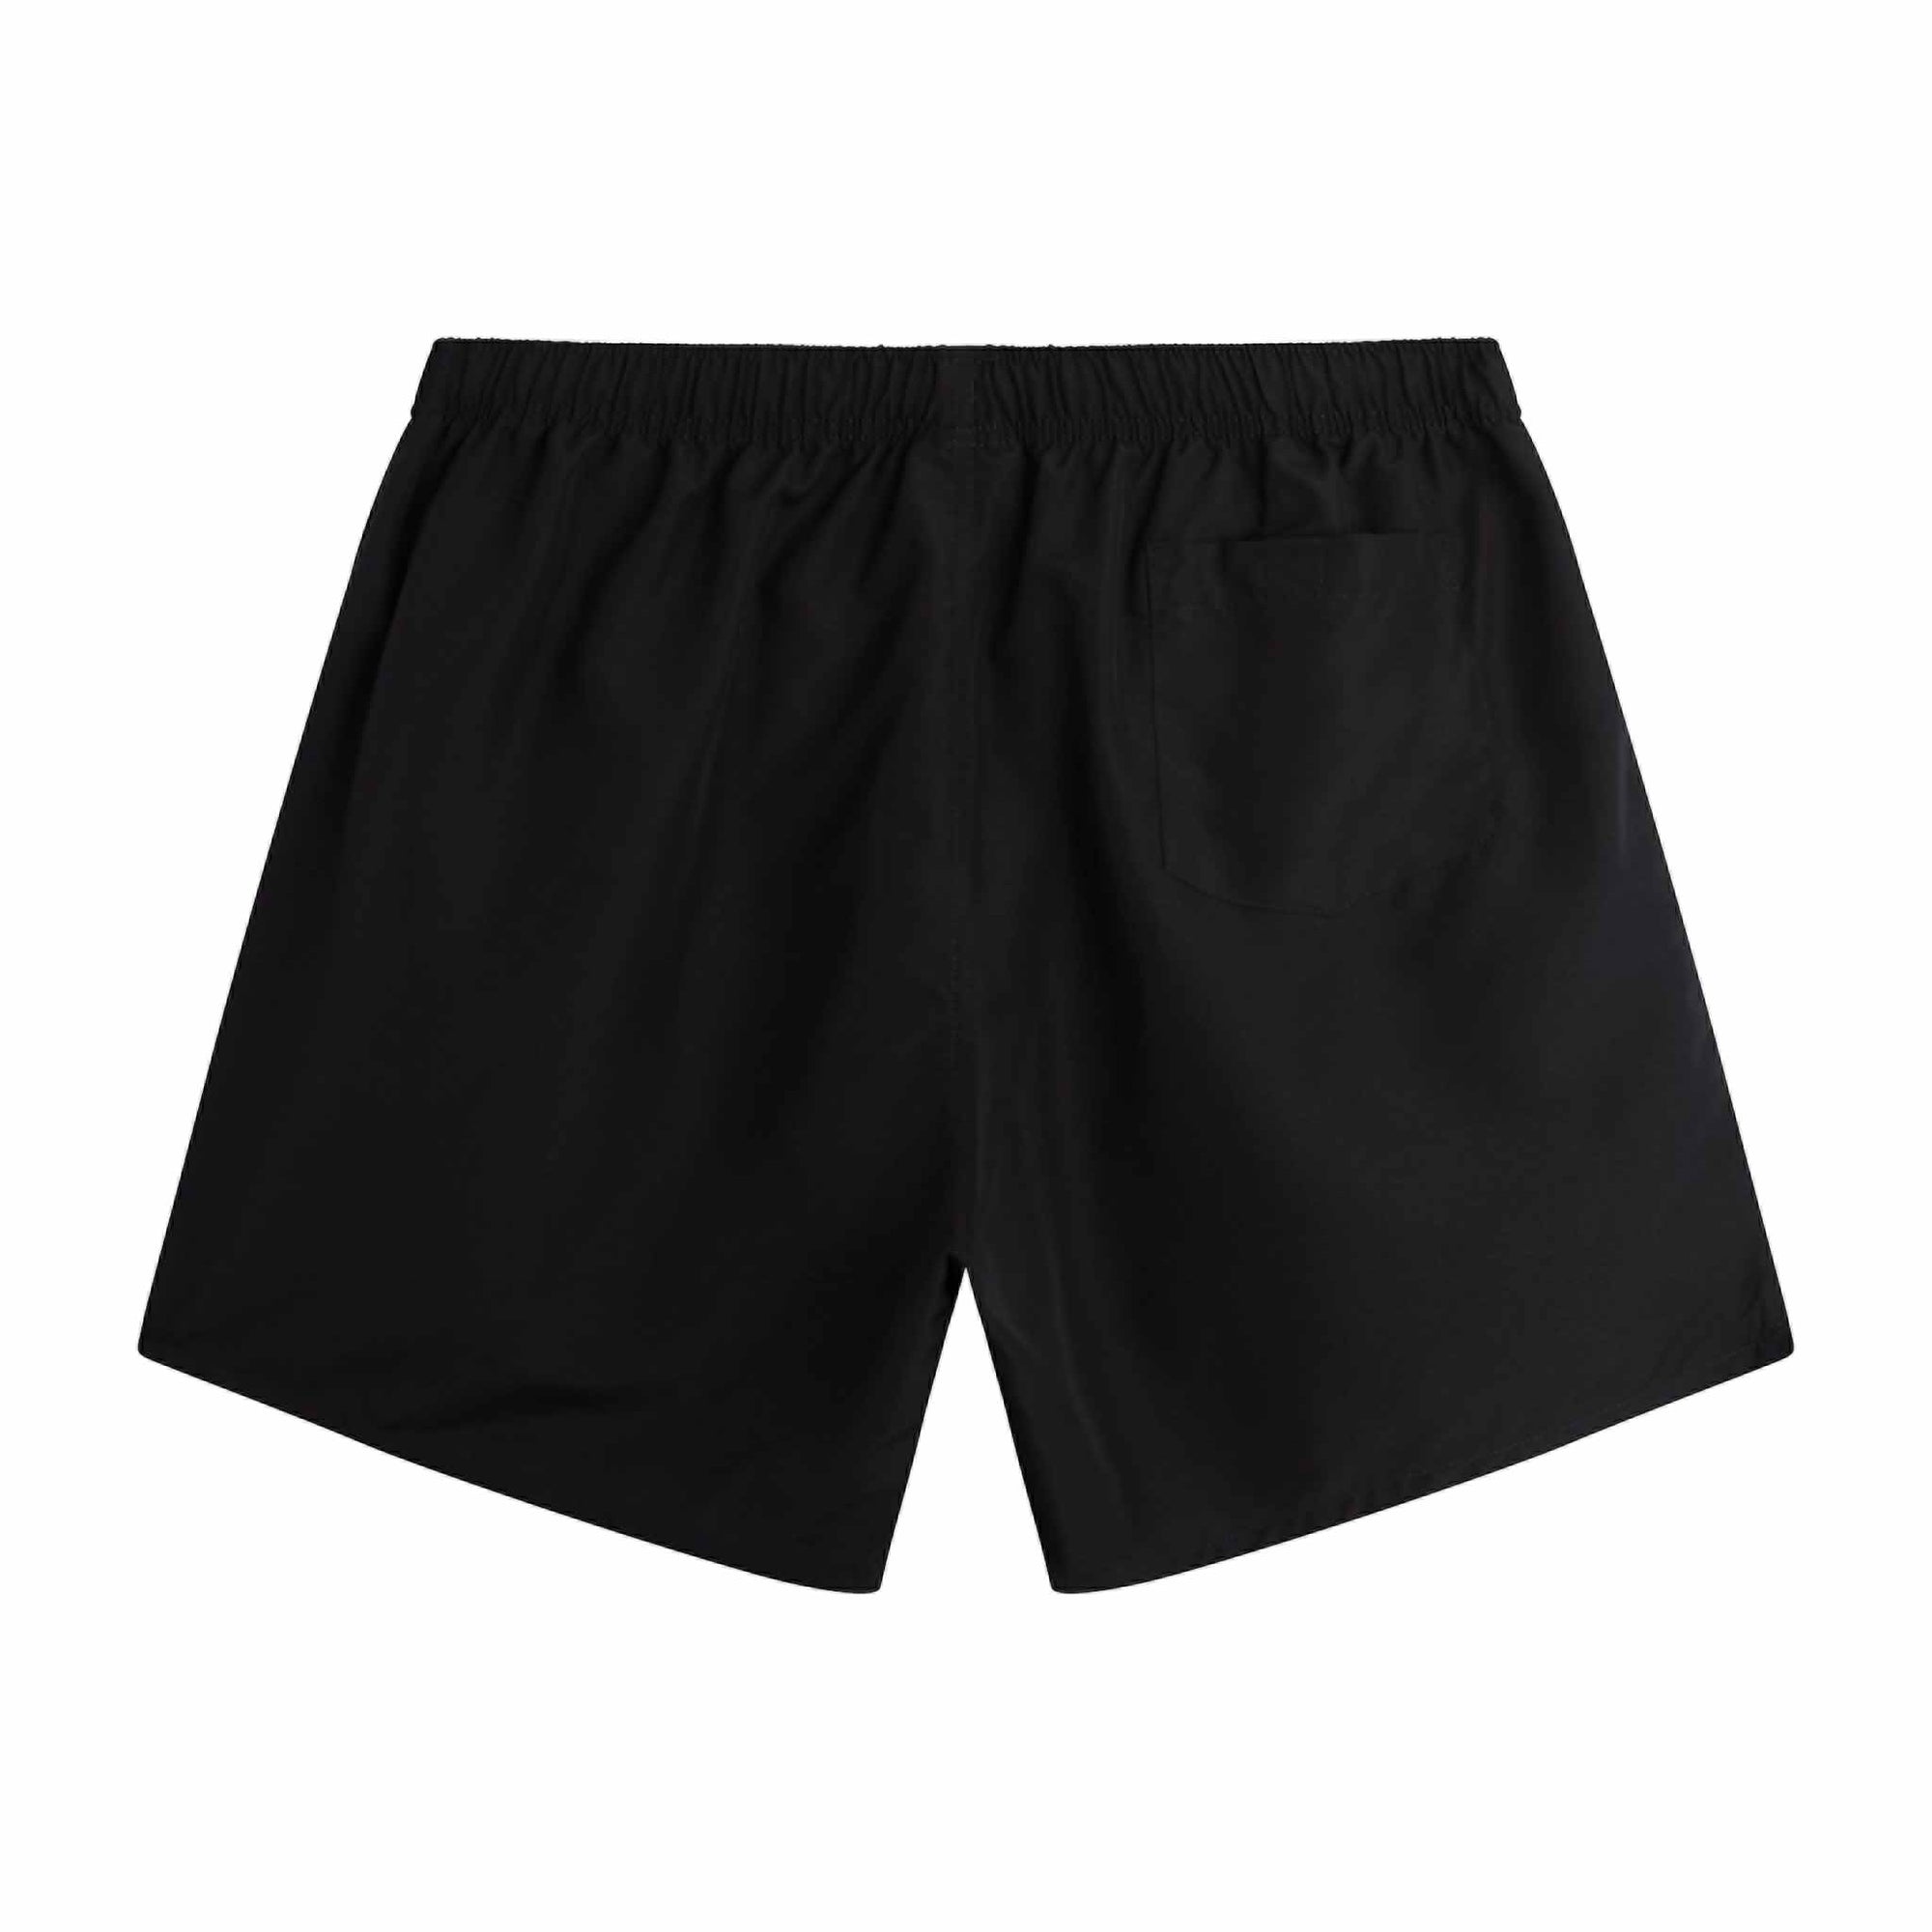 UW Women's Huskies Rugby Club Canterbury Tactic Shorts - Adult Unisex - Black - The Rugby Shop The Rugby Shop UNISEX / BLACK / XS TRS Distribution Canada SHORTS UW Women's Huskies Rugby Club Canterbury Tactic Shorts - Adult Unisex - Black